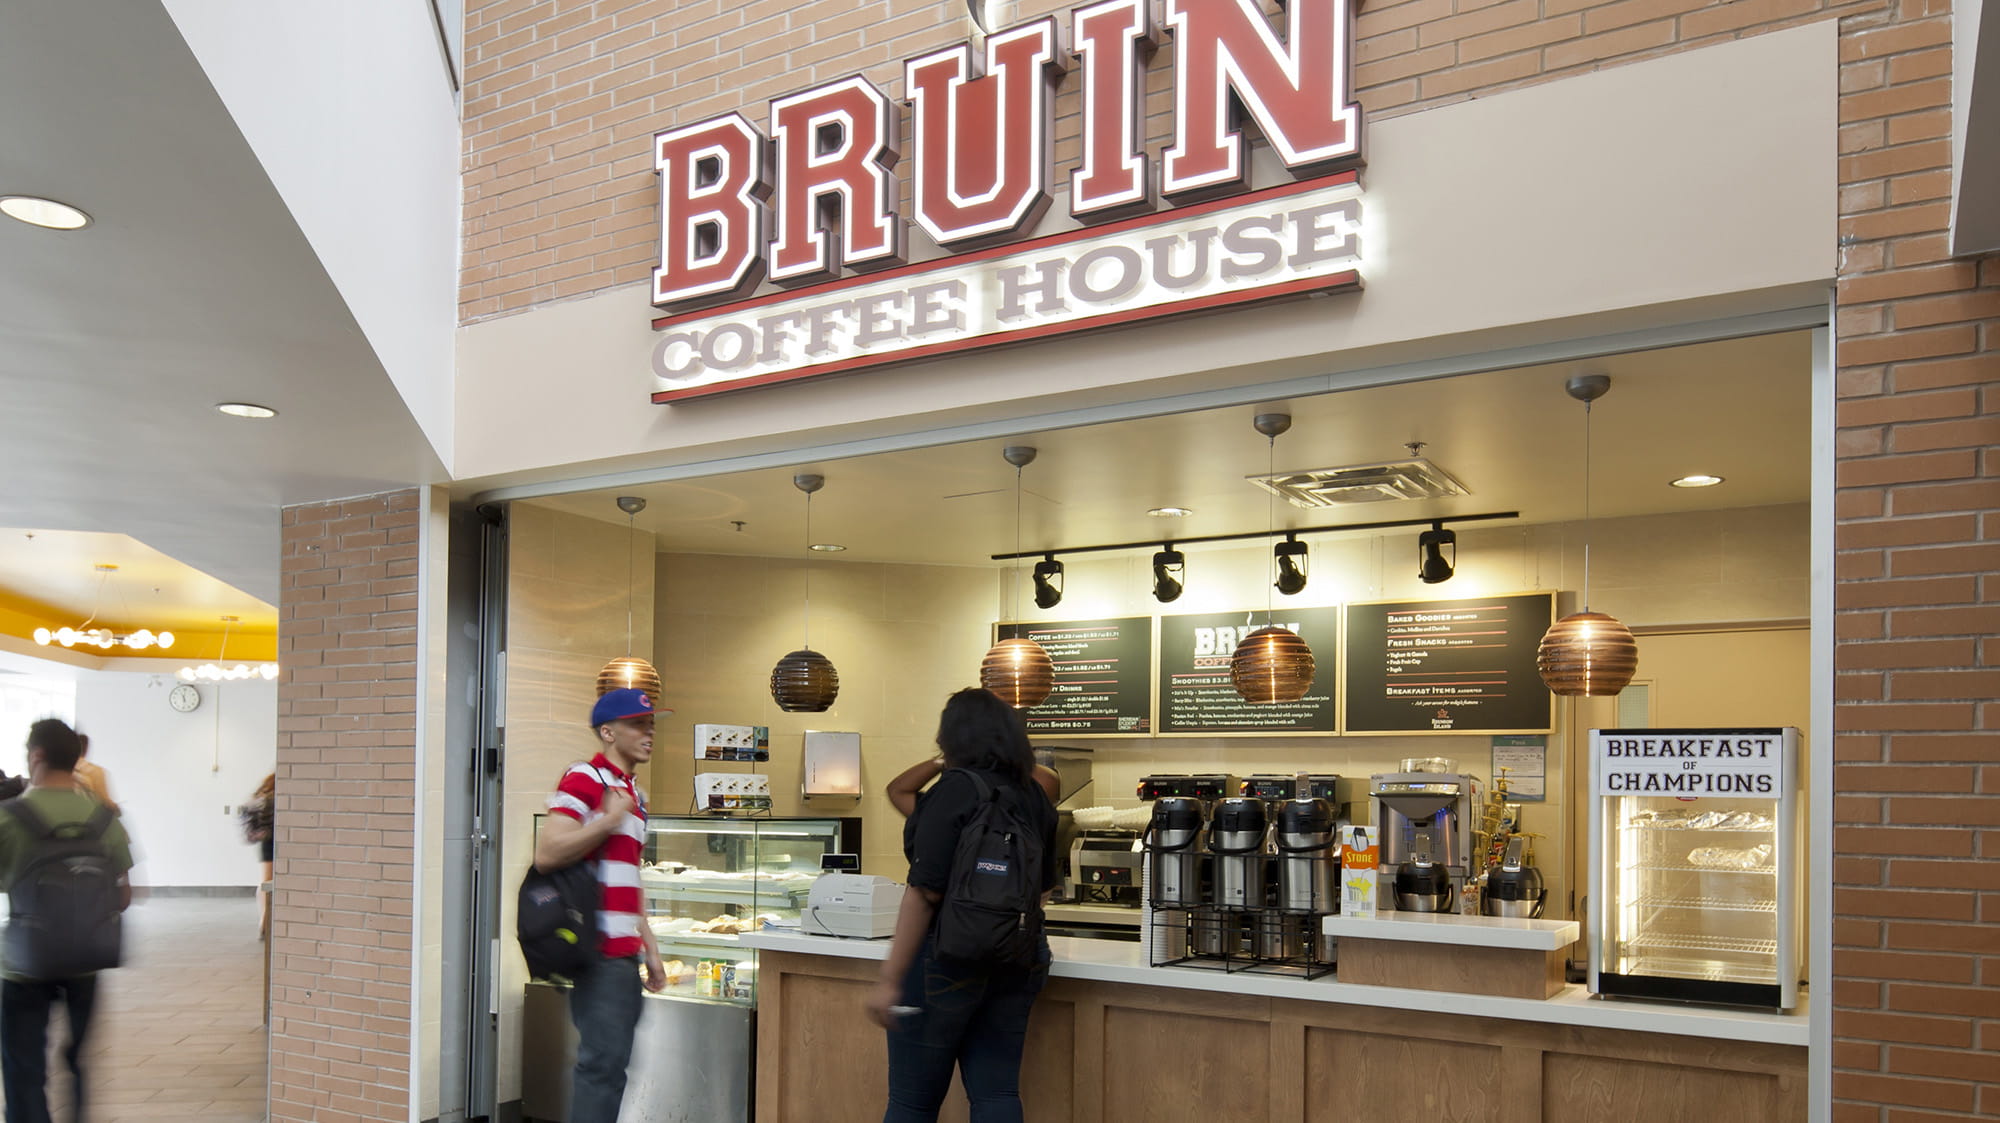 The Bruin Coffee House sign over the counter where students are ordering coffee